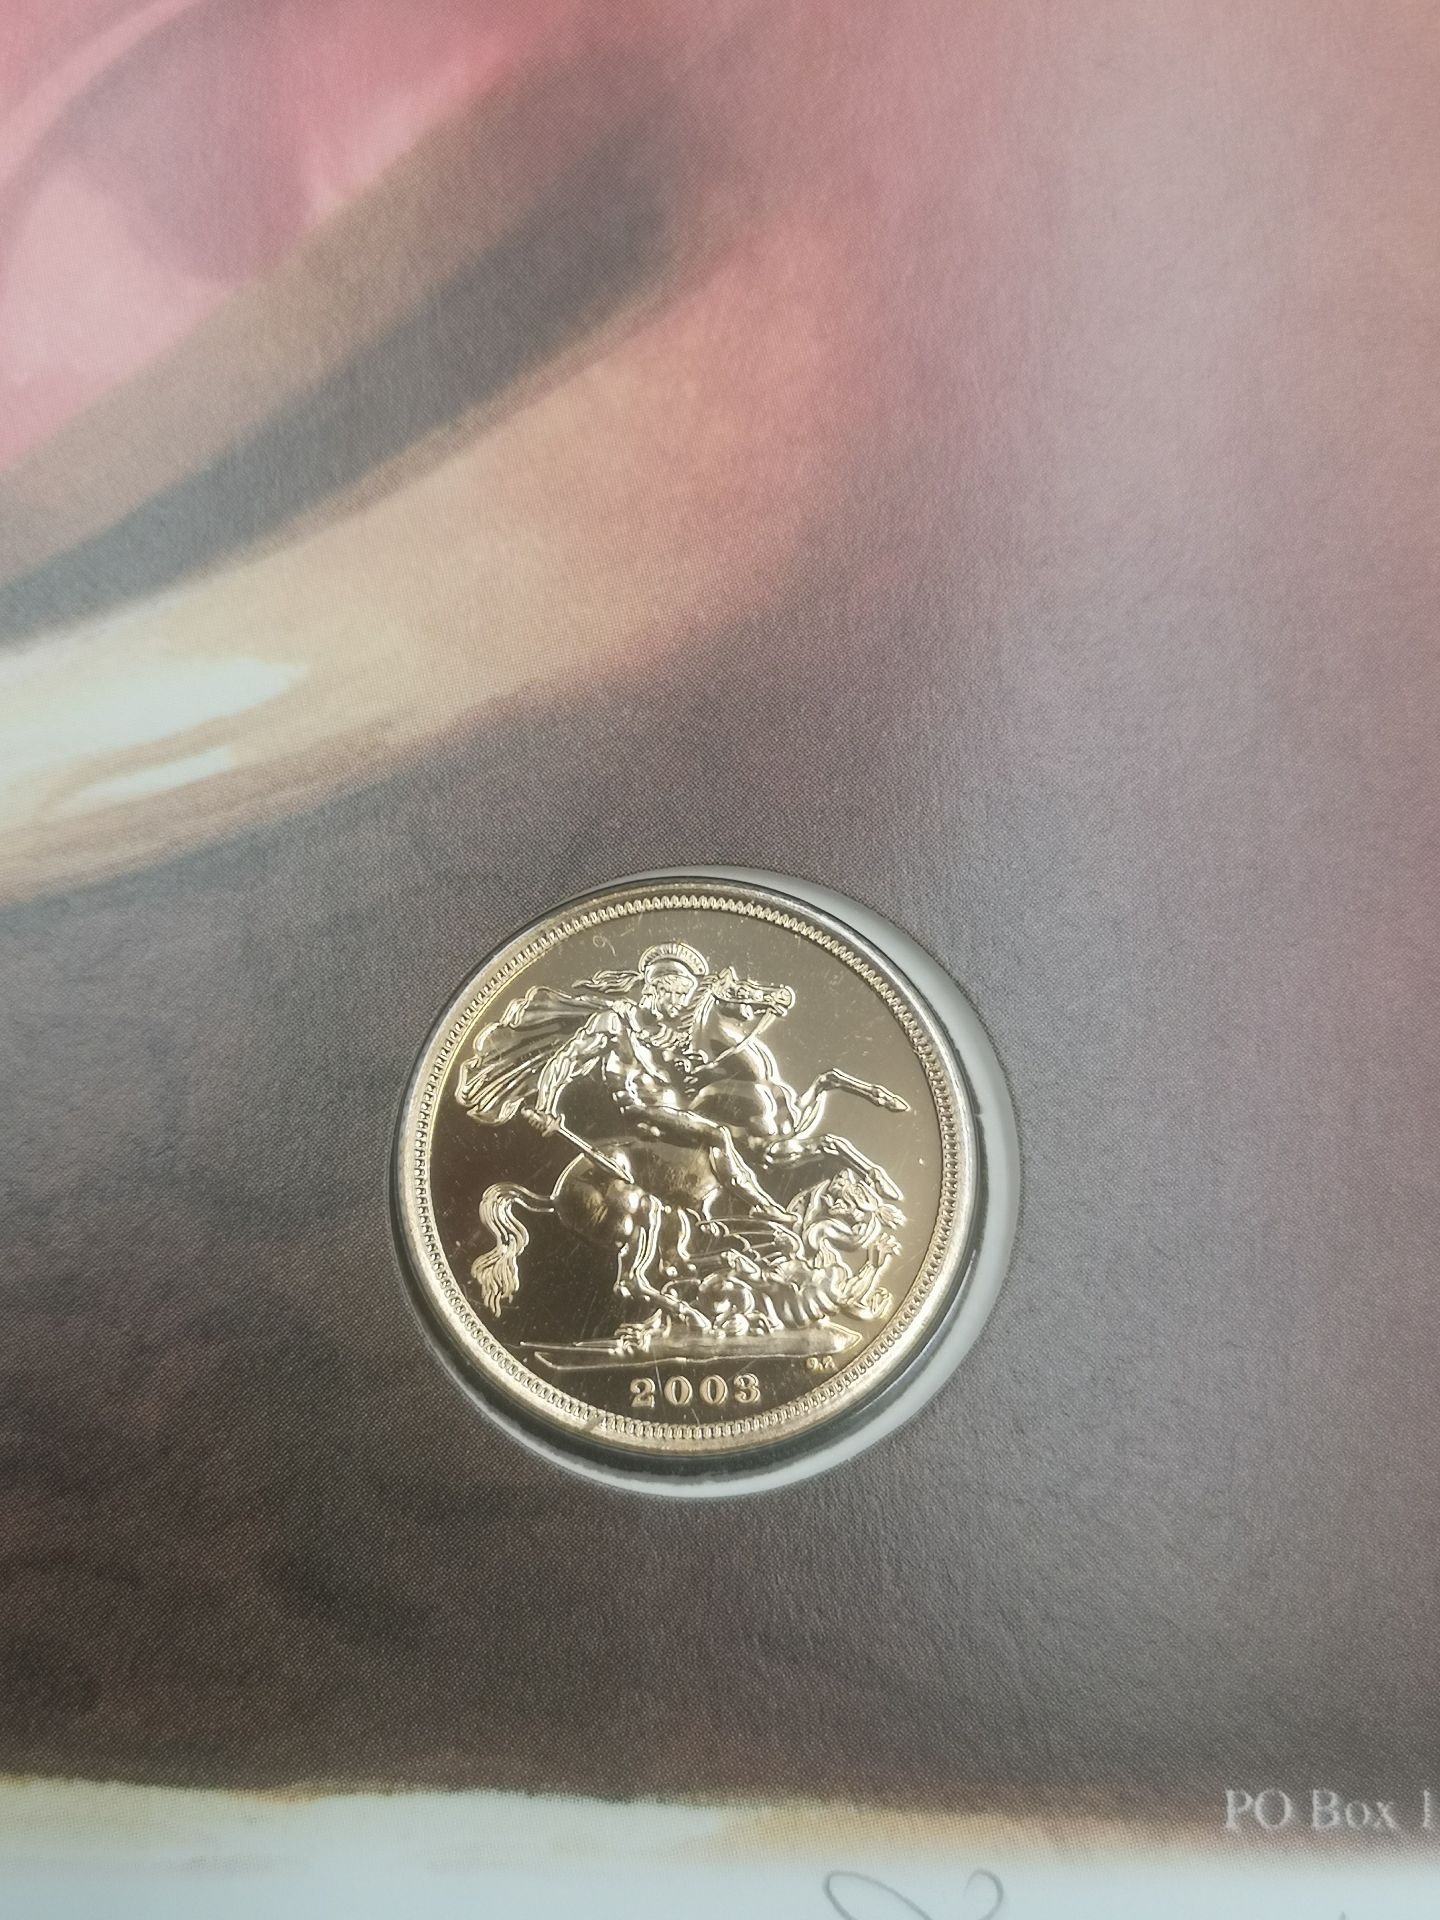 2003 Wilding anniversary gold sovereign - Image 5 of 5